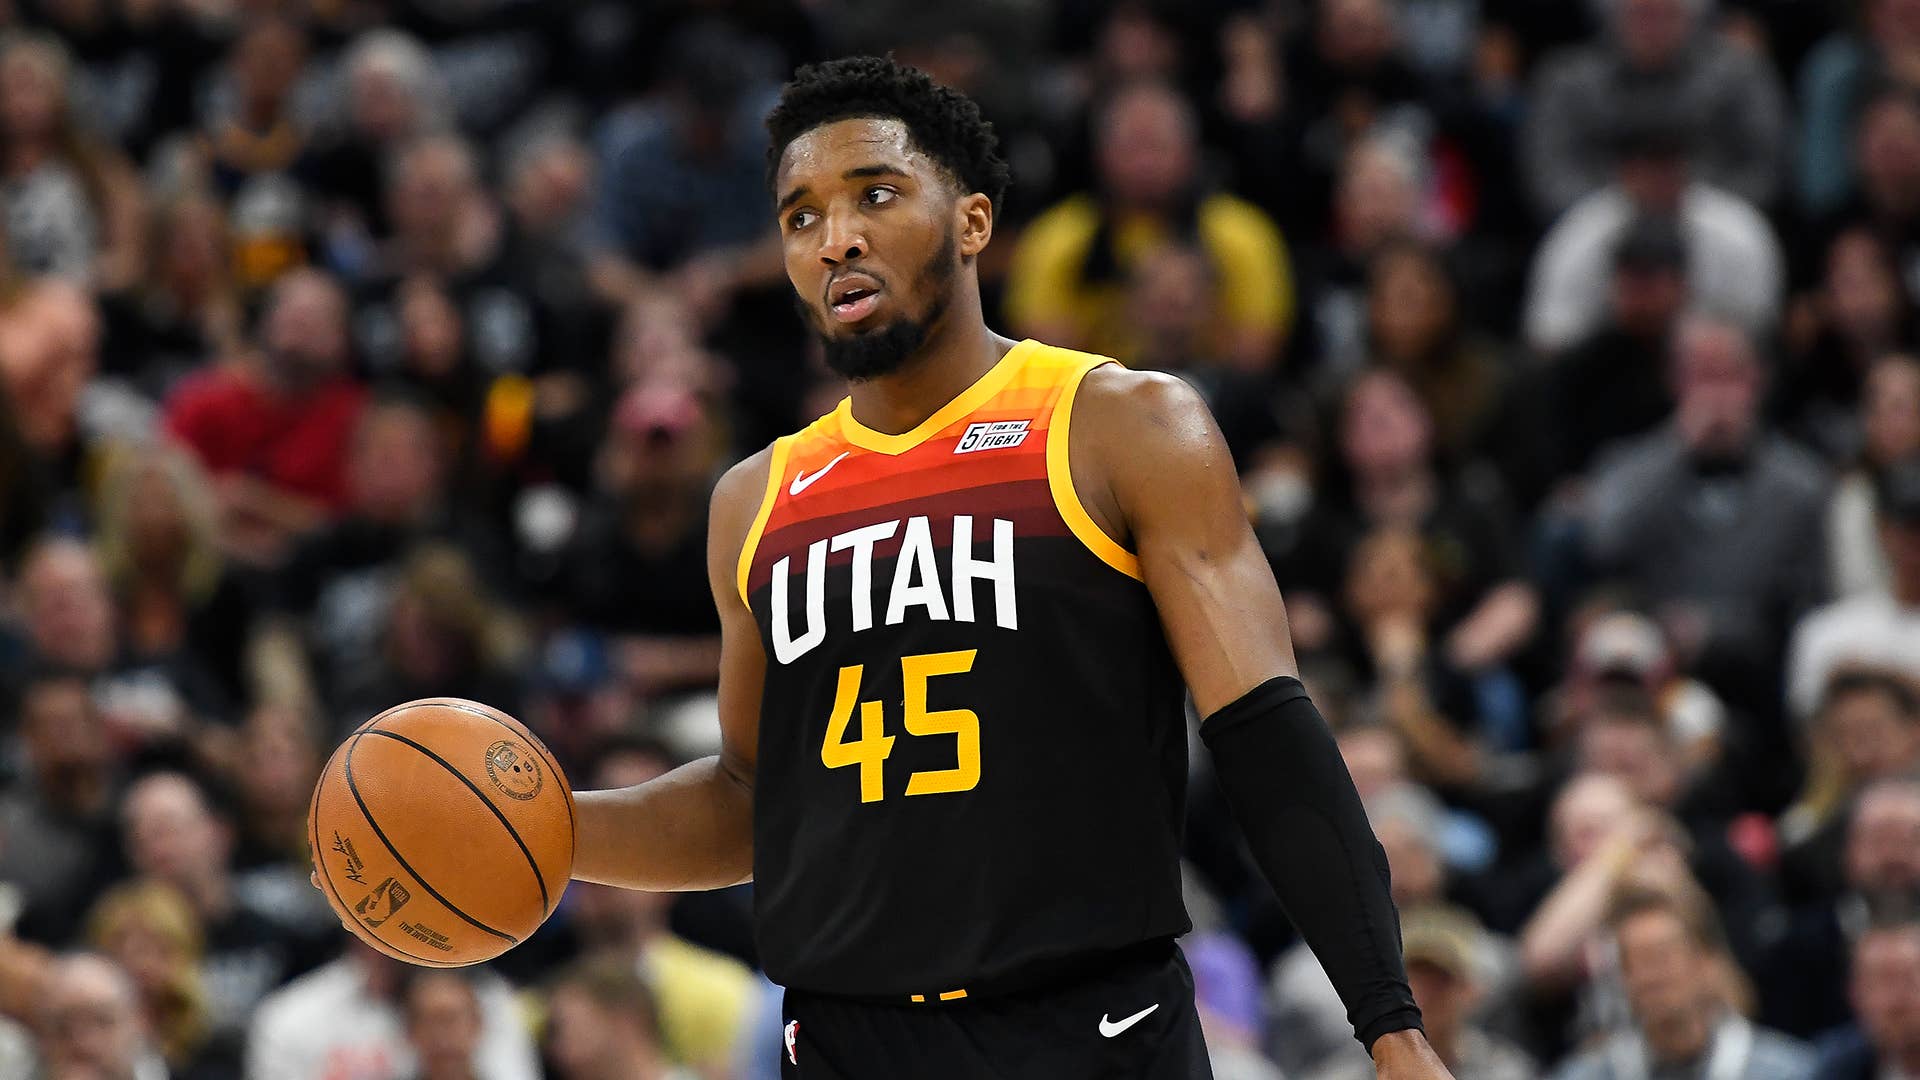 Donovan Mitchell #45 of the Utah Jazz in action during the second half of Game 6 of the Western Conference First Round Playoffs